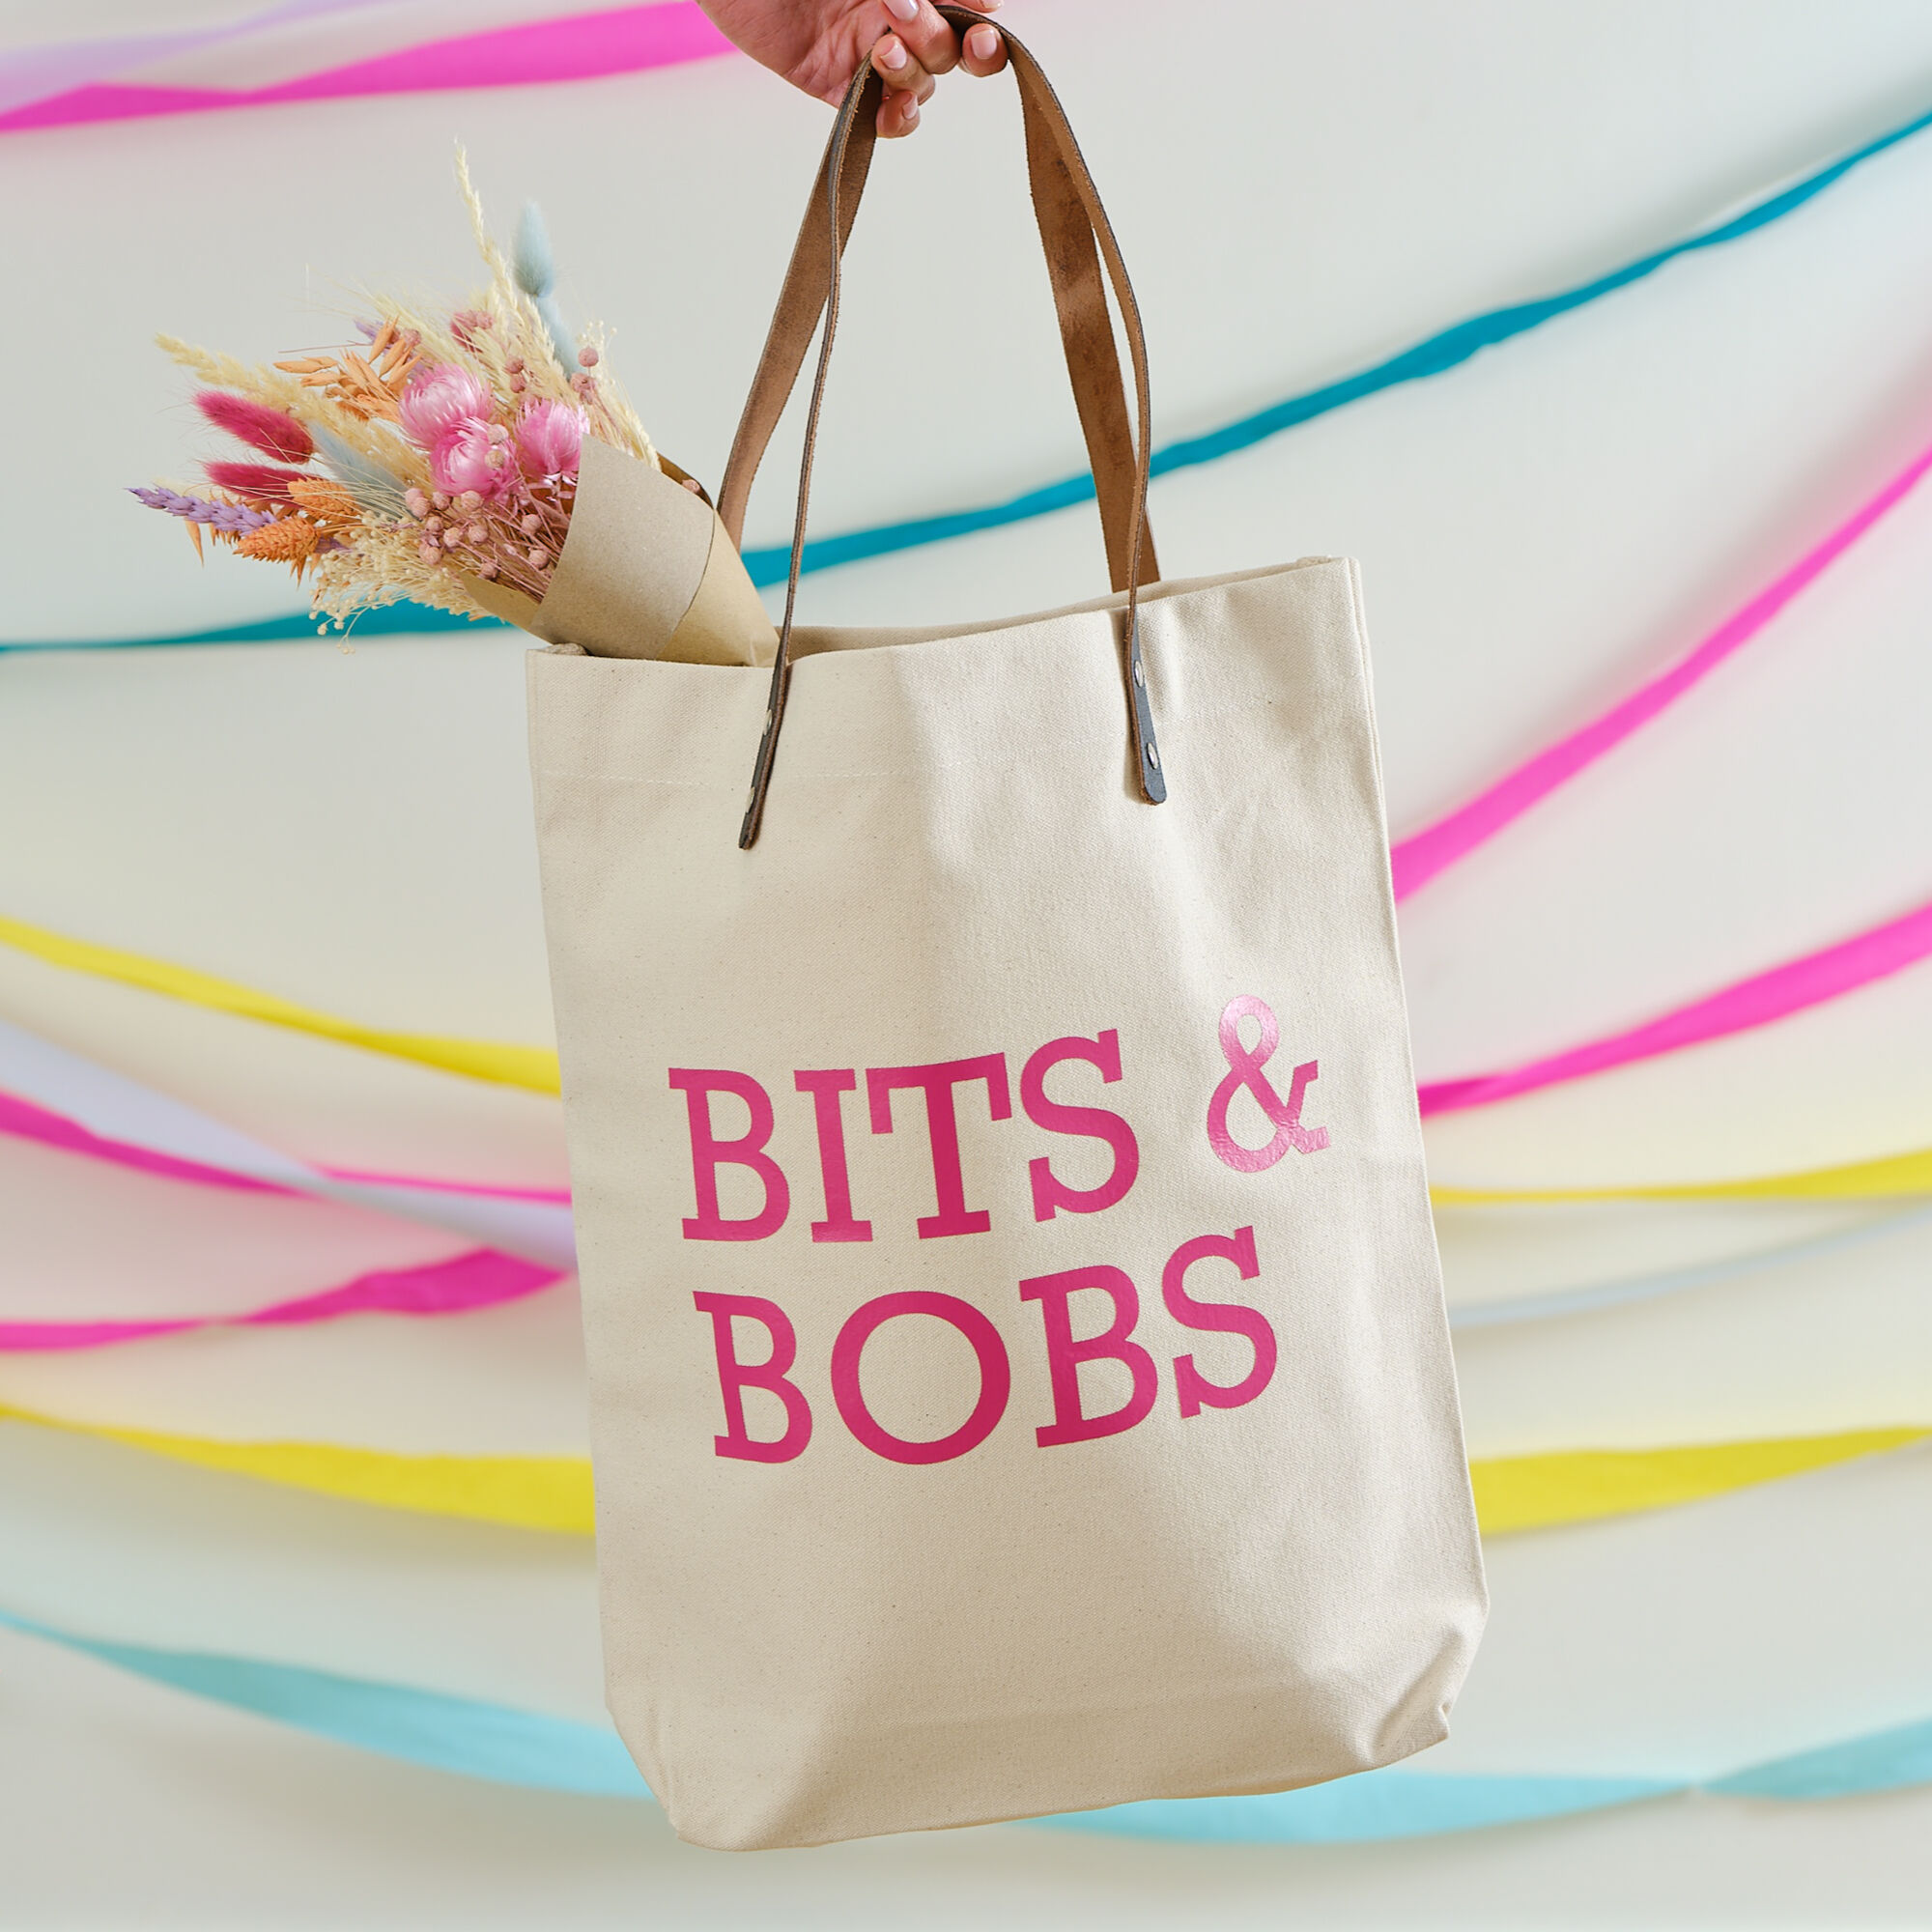 How to Personalise a Tote Bag for Pride | Hobbycraft